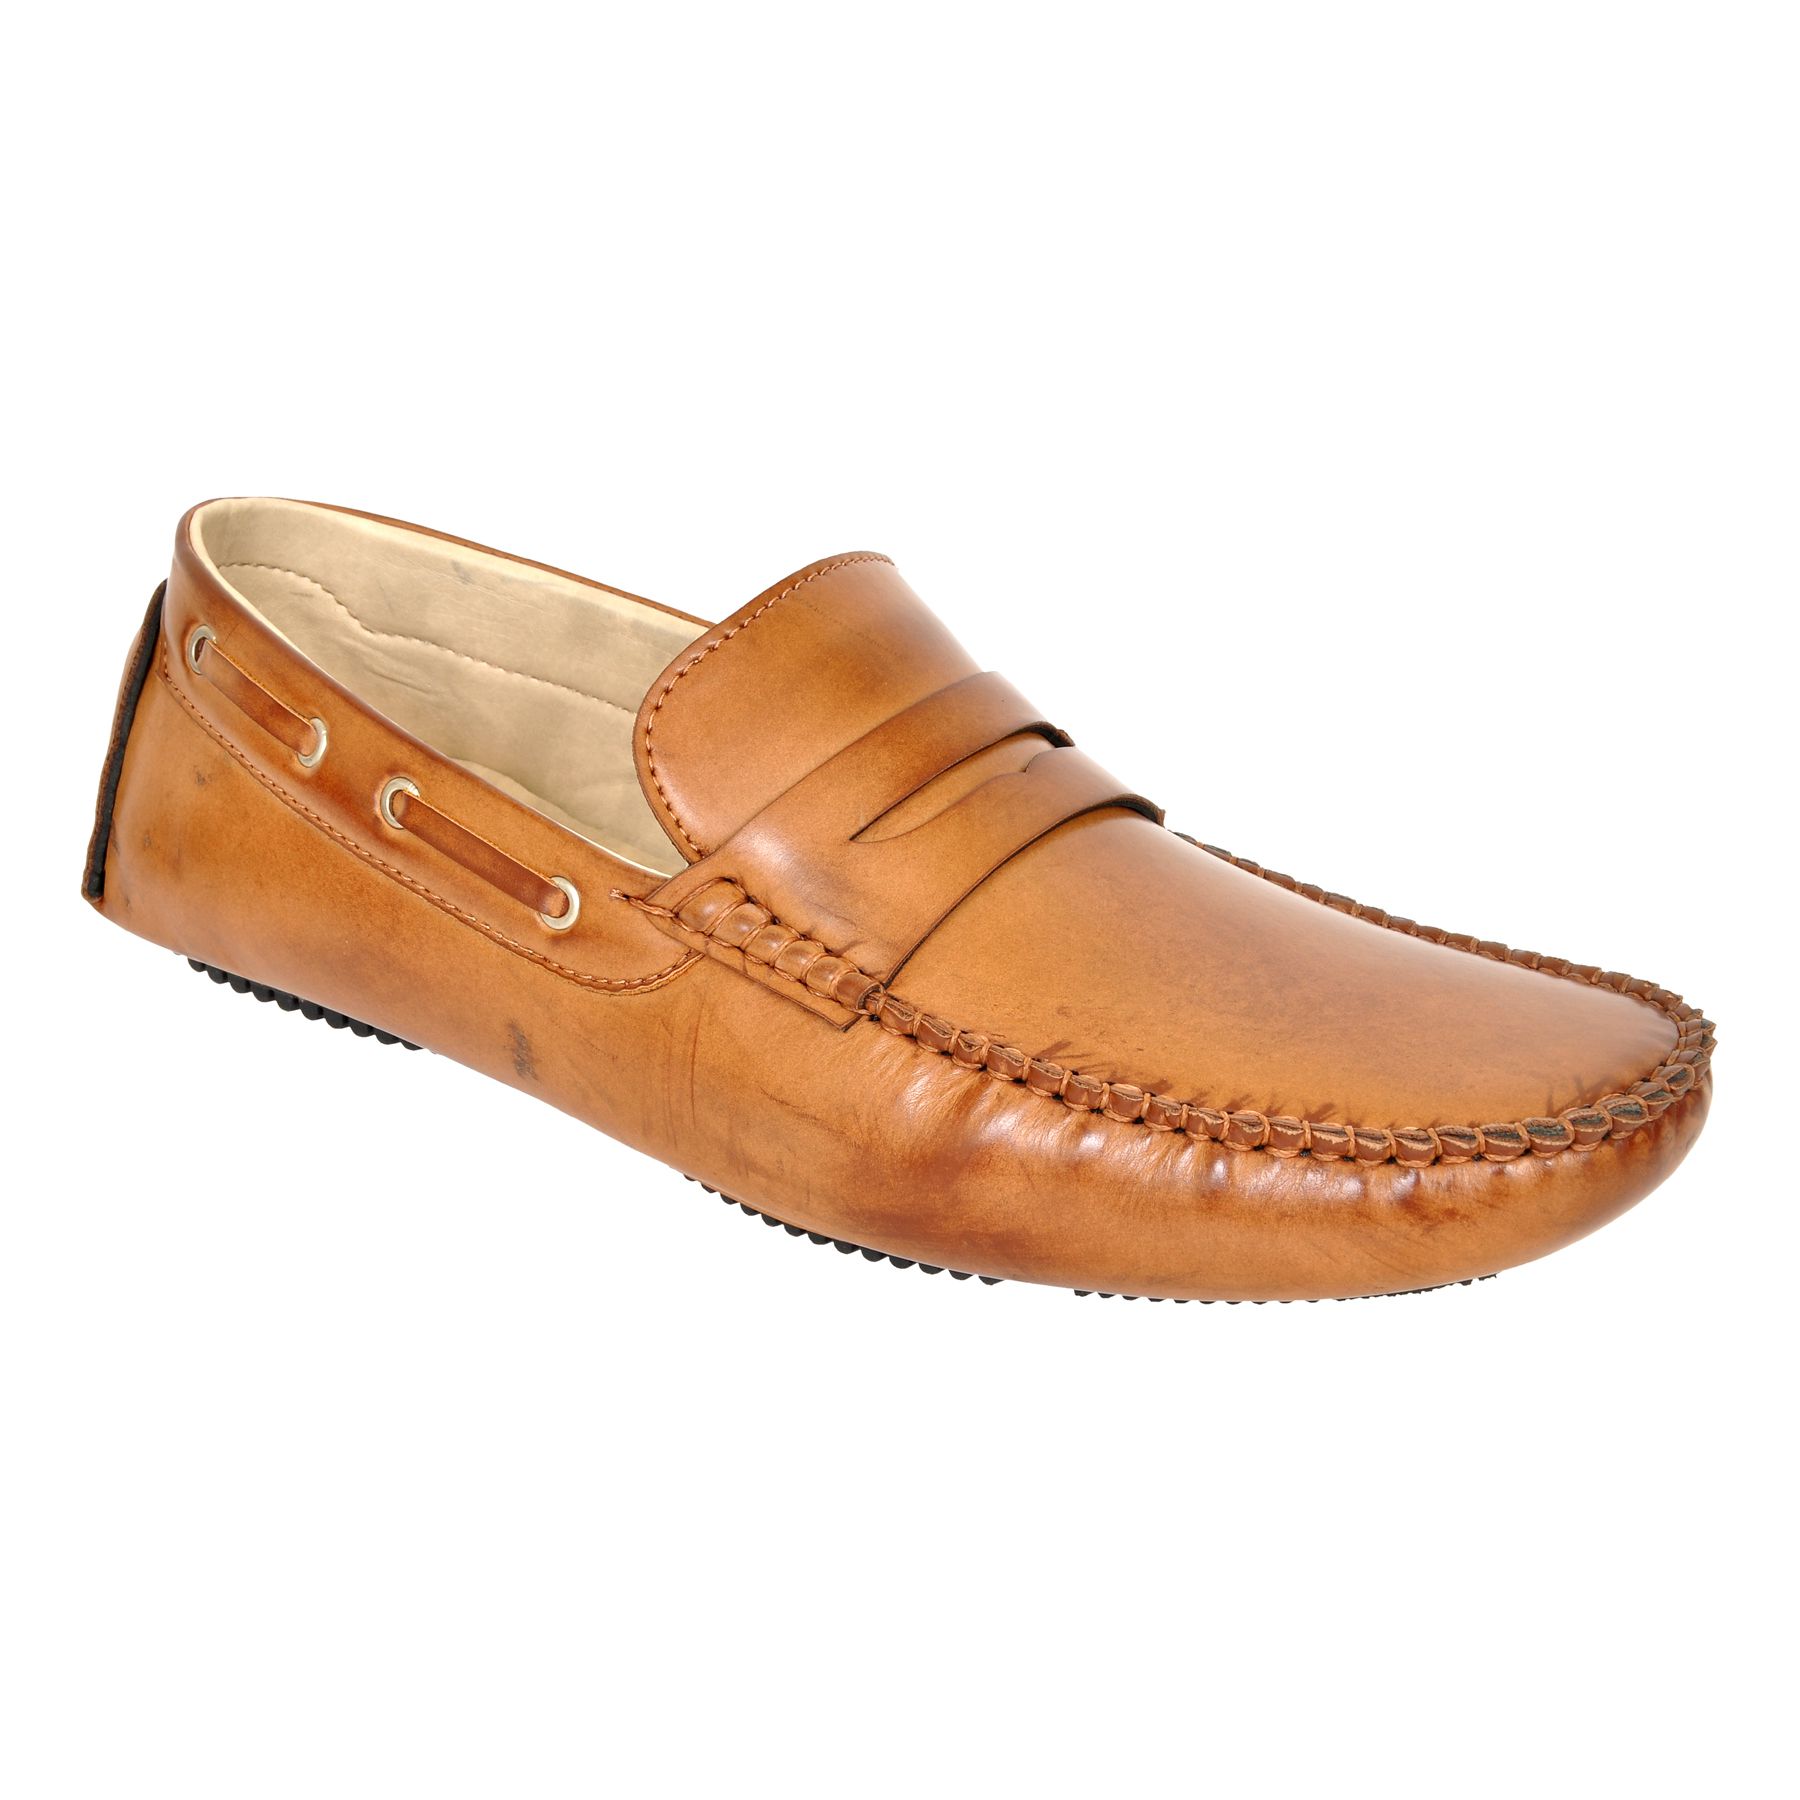 Lee Fox Tan Loafers - Buy Lee Fox Tan Loafers Online at Best Prices in ...